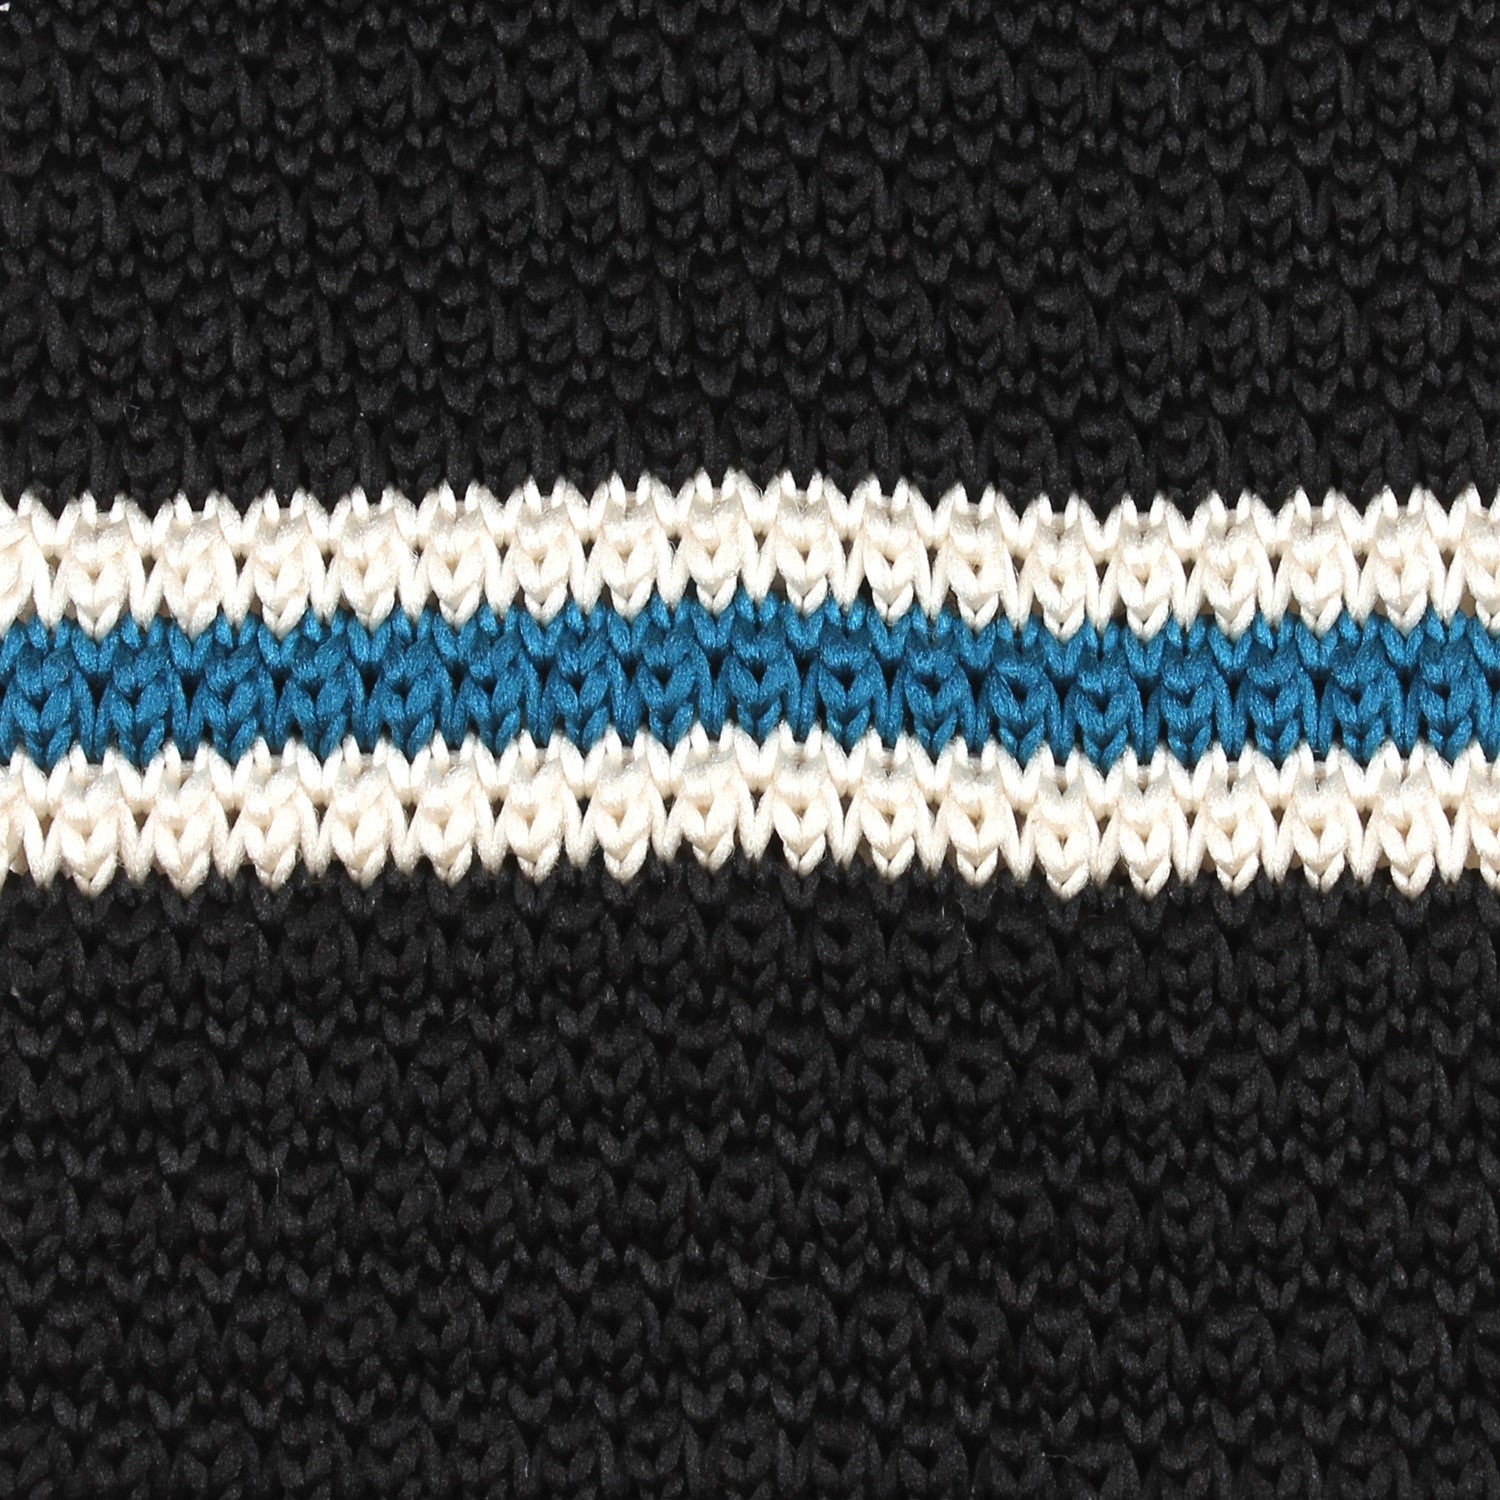 Black Knitted Tie with White & Blue Teal Stripes Detail View